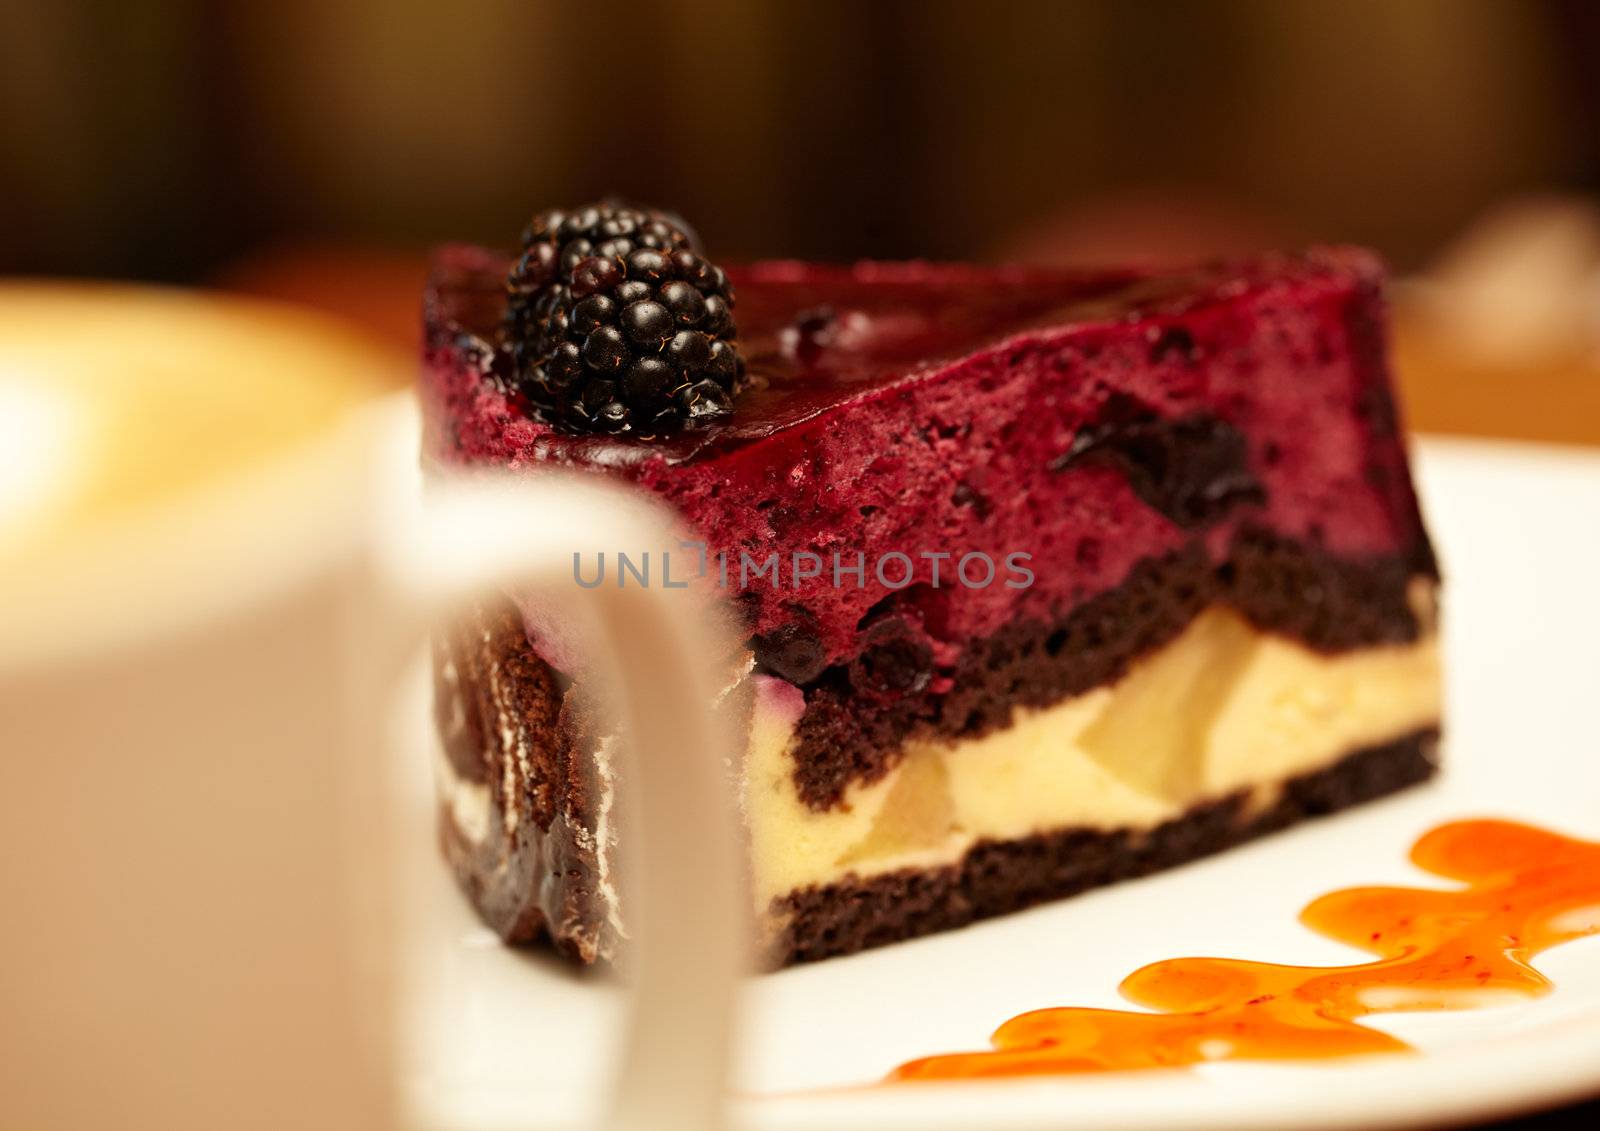 Cheesecake with blackberry on a plate and a cup of coffee, shallow dof.